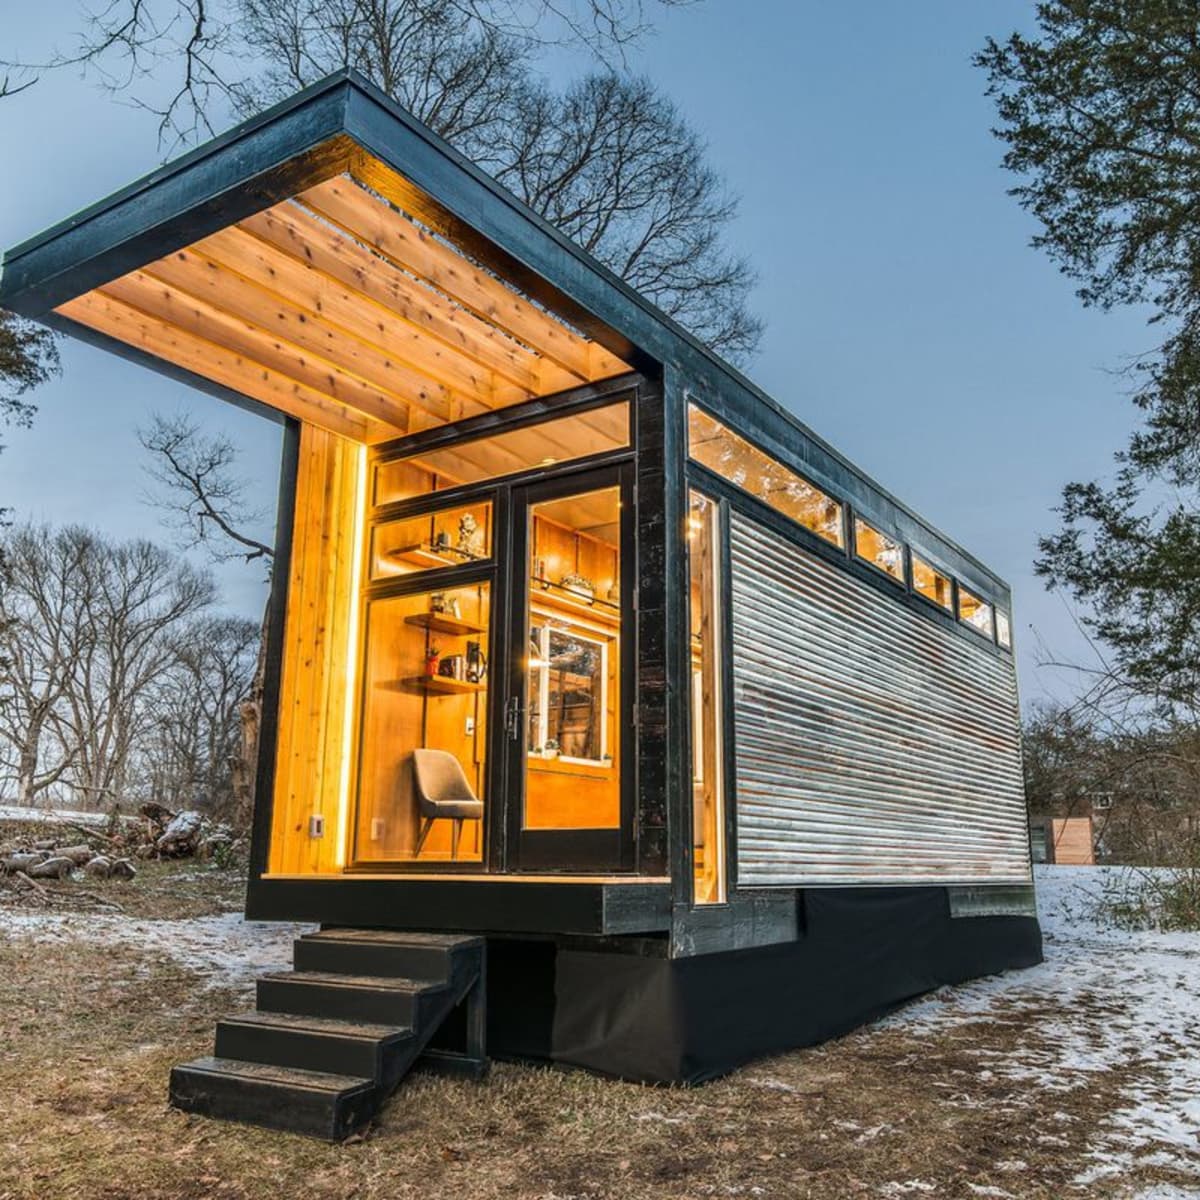 A Tiny House With a Larger Meaning